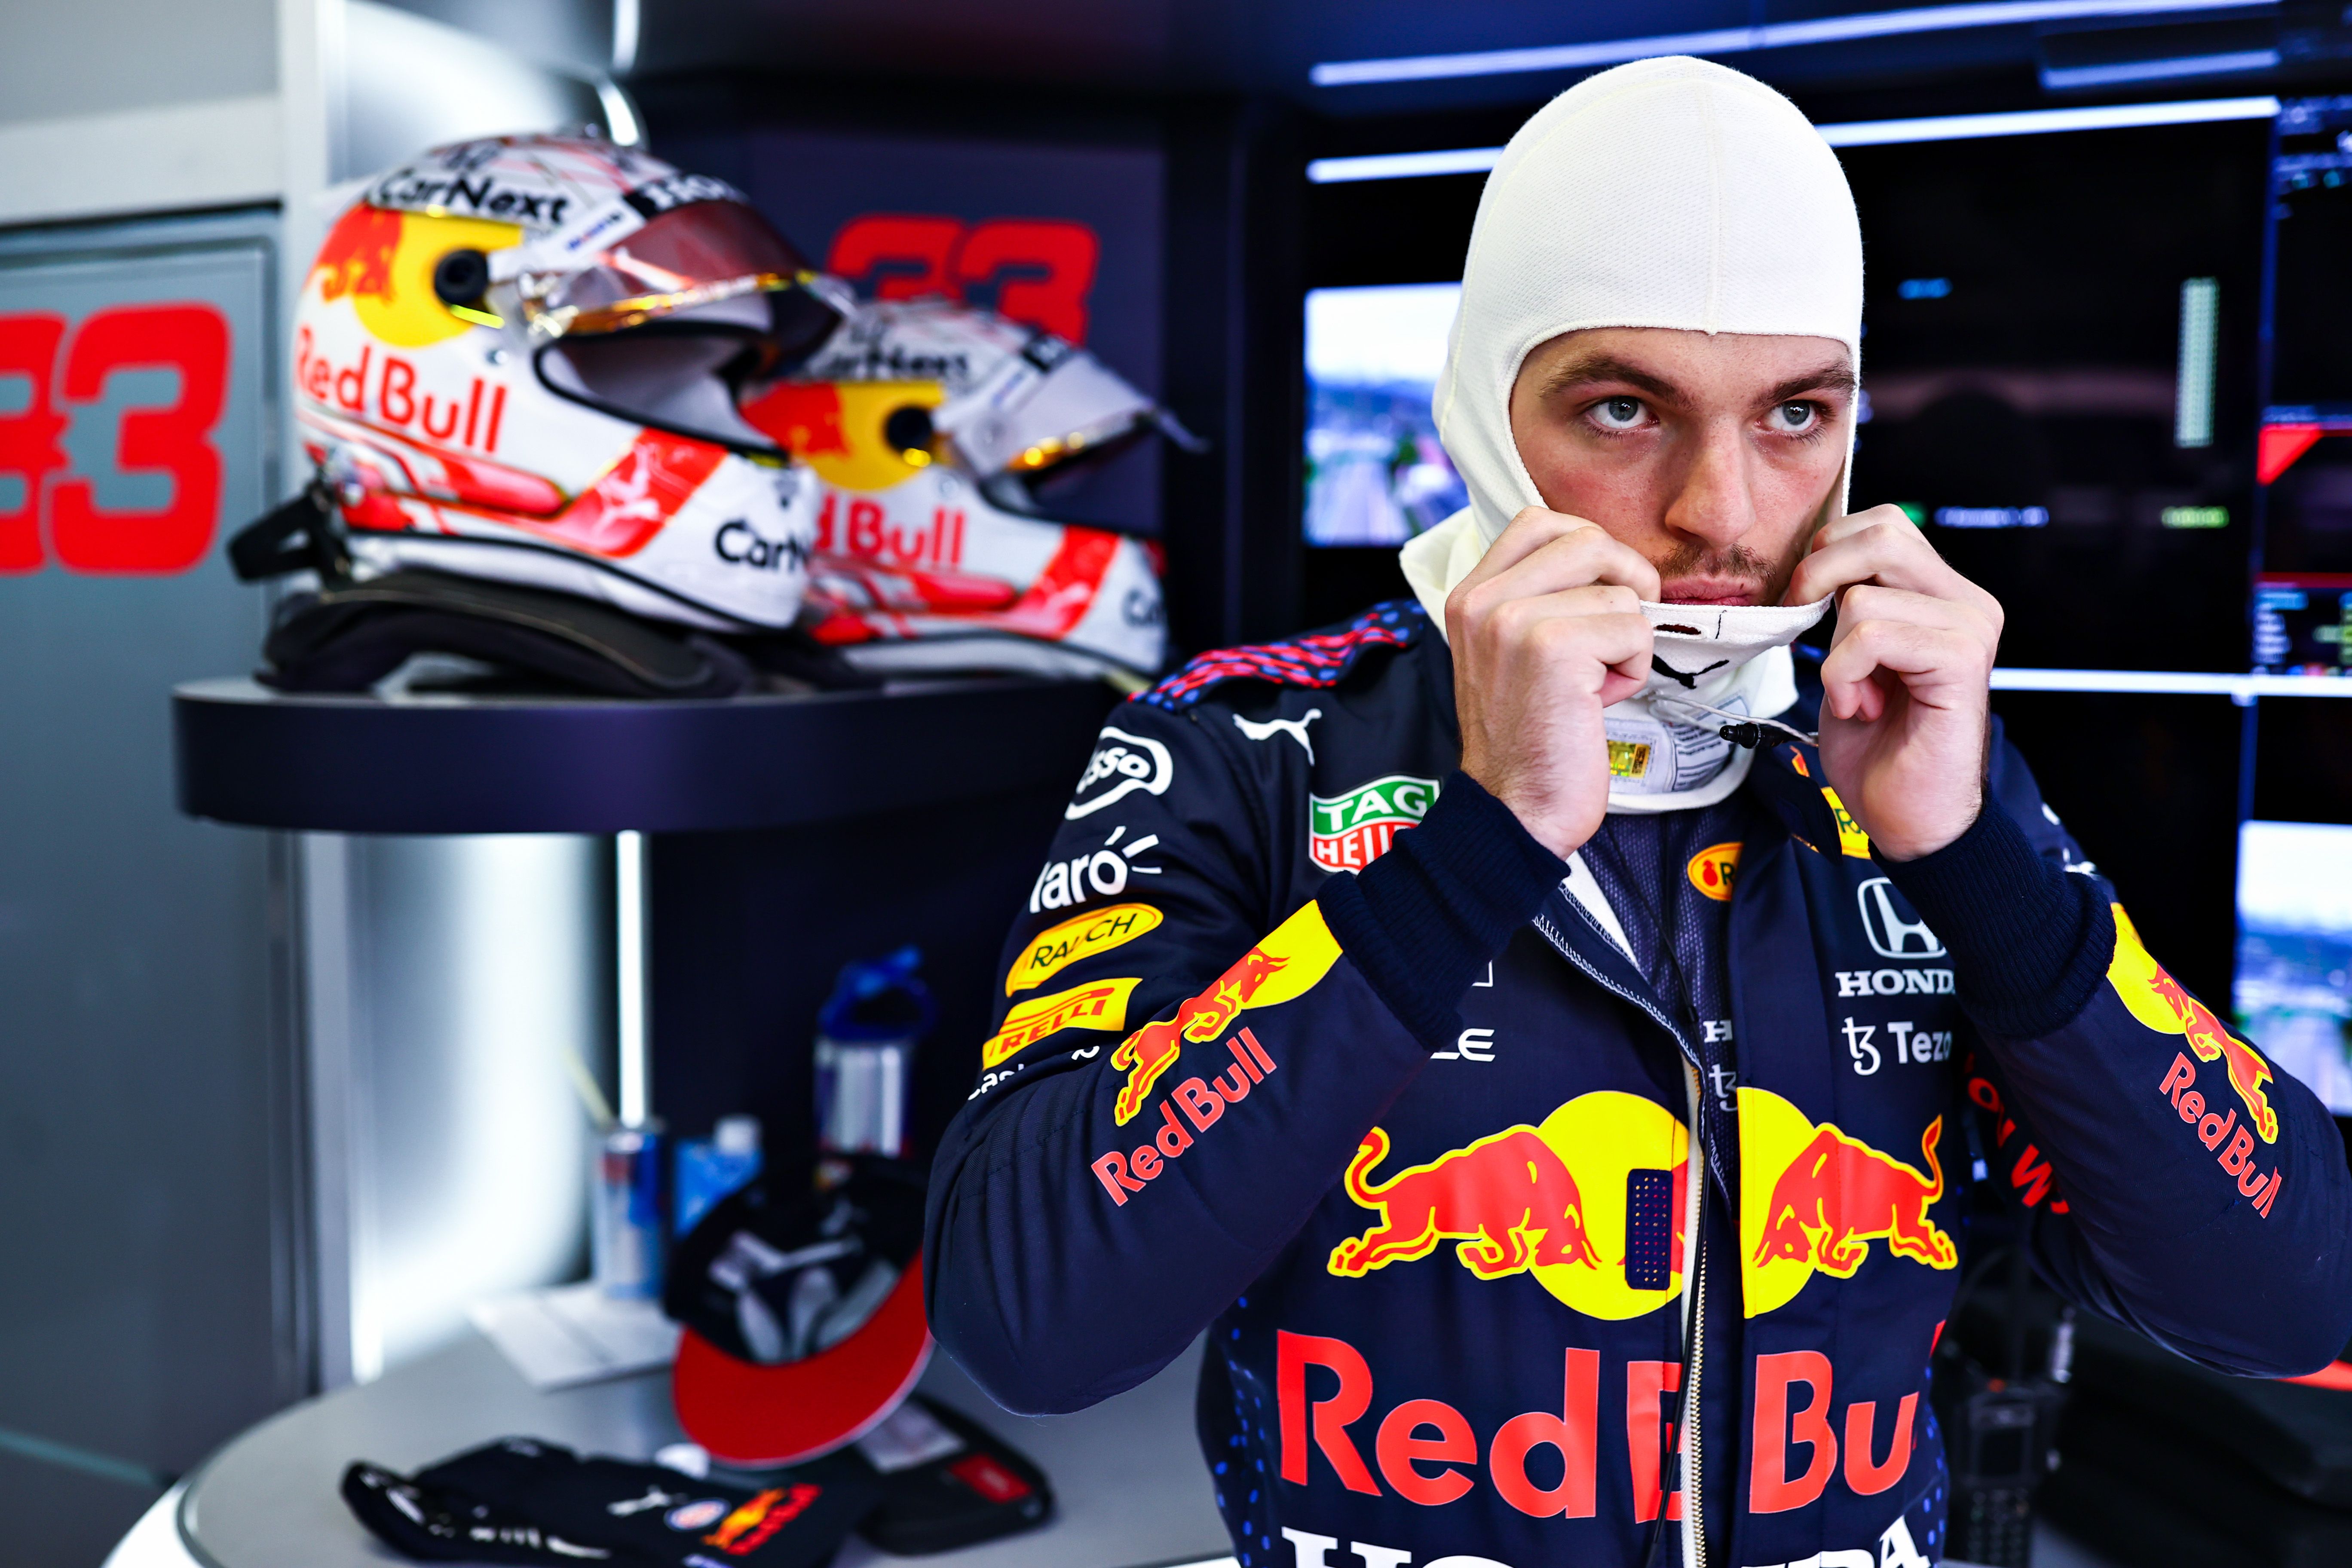 Formula 1 Leader Verstappen to Start From the Back at F1 Russian Grand Prix